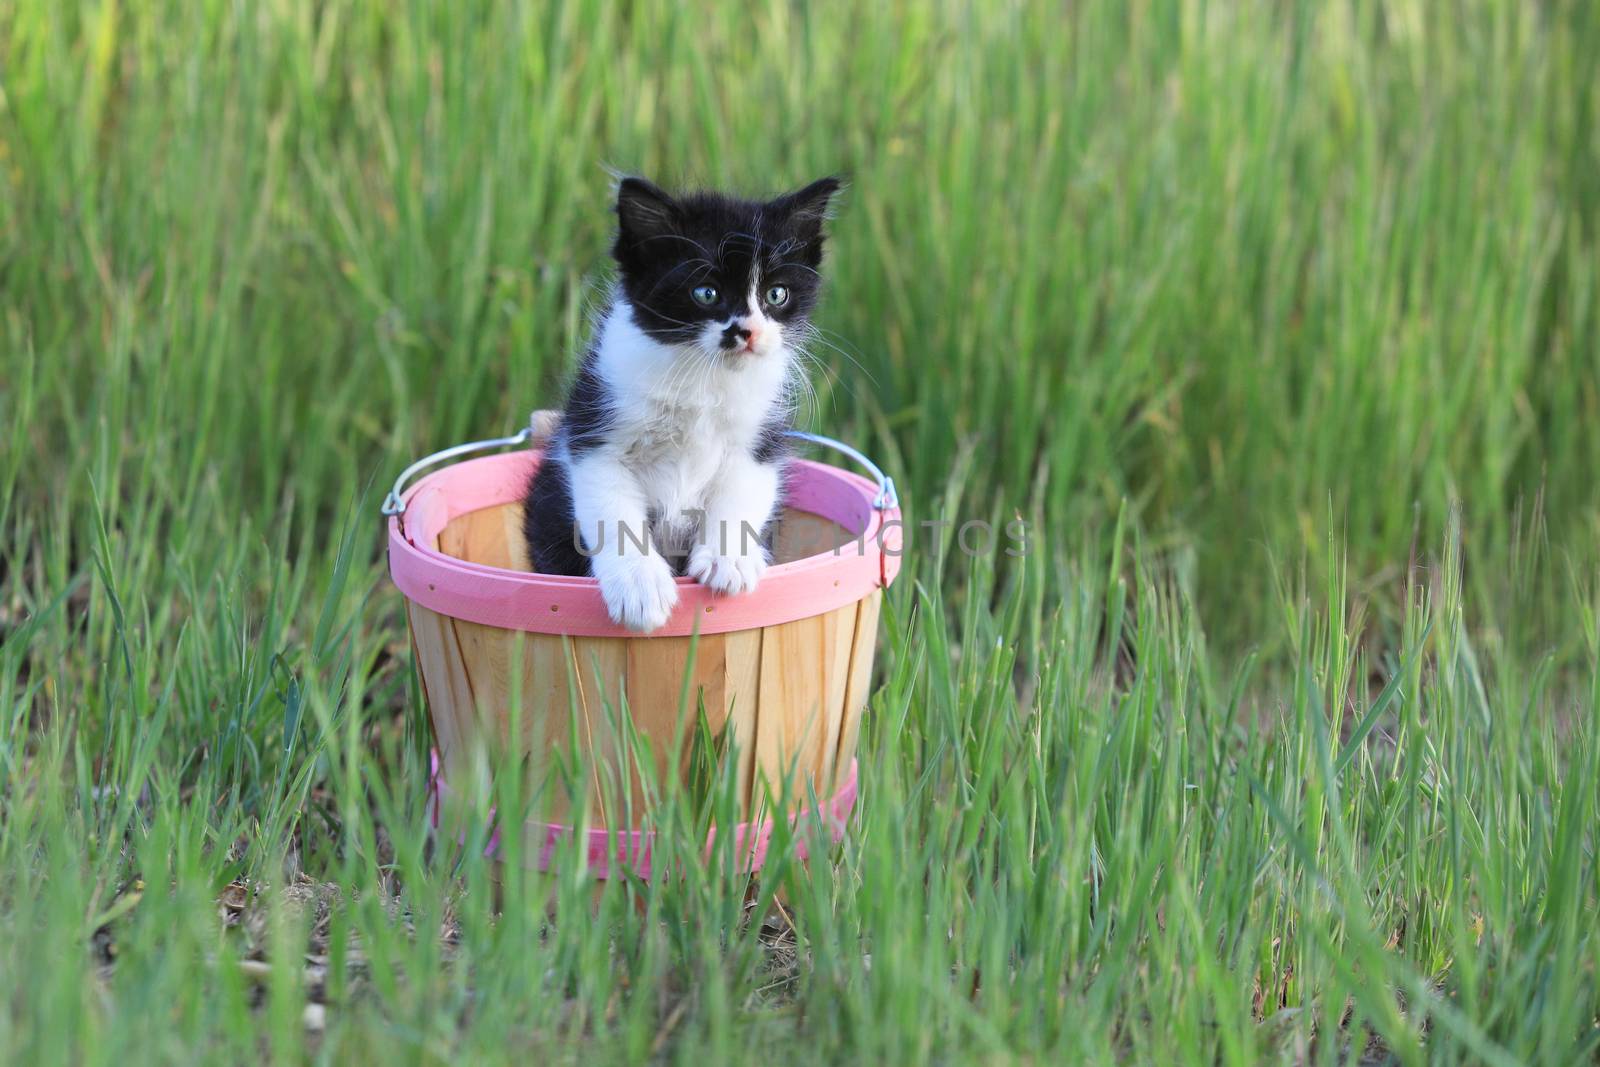 Kitten Outdoors in Green Tall Grass on a Sunny Day by tobkatrina